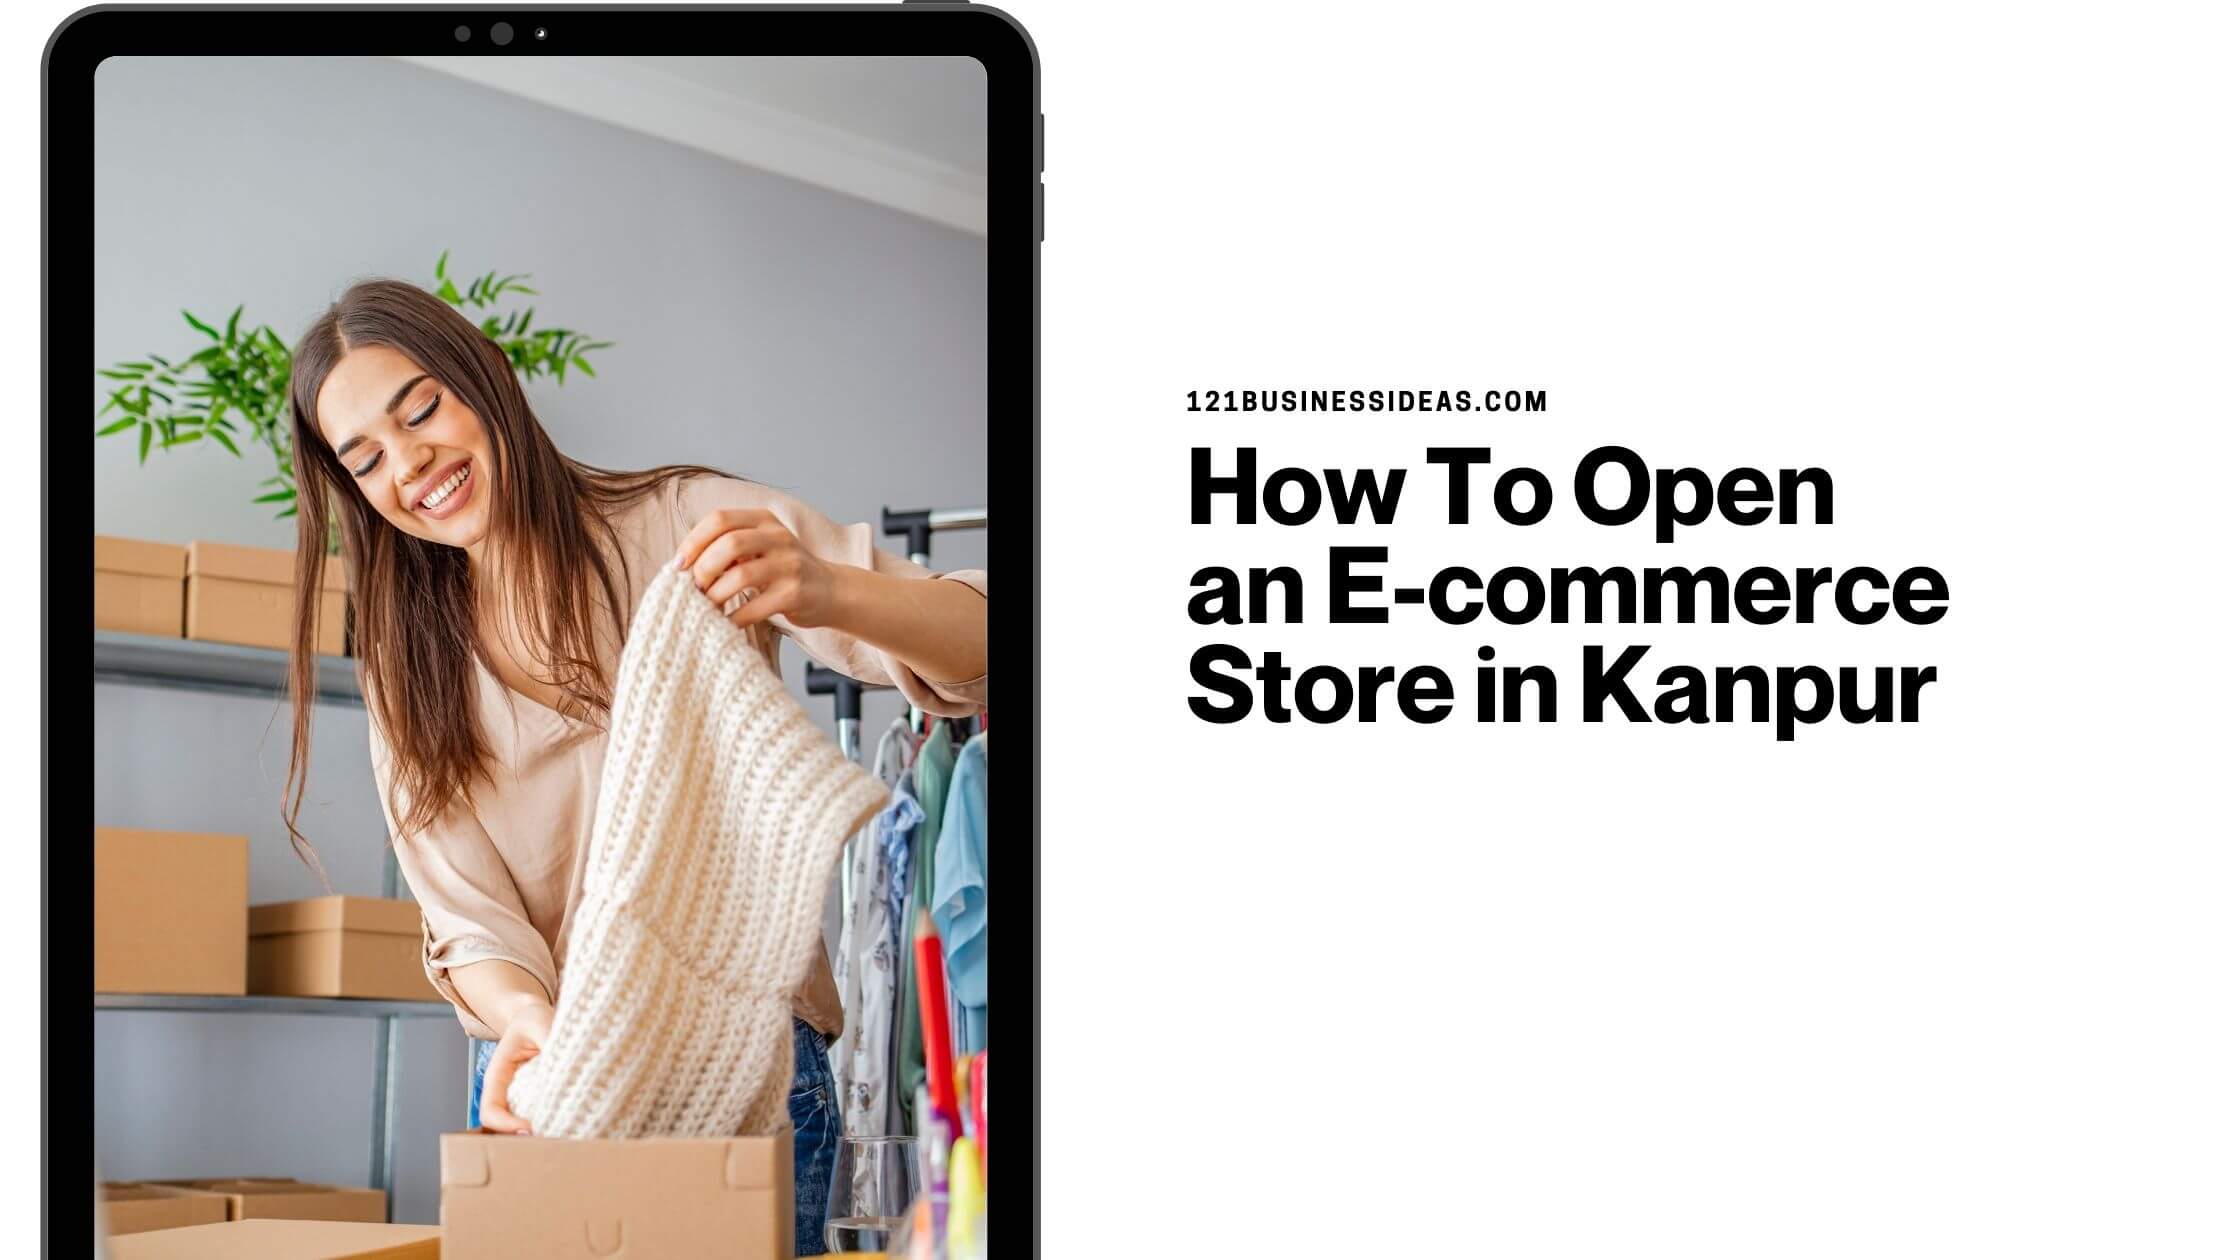 How To Open an E-commerce Store in Kanpur (1)